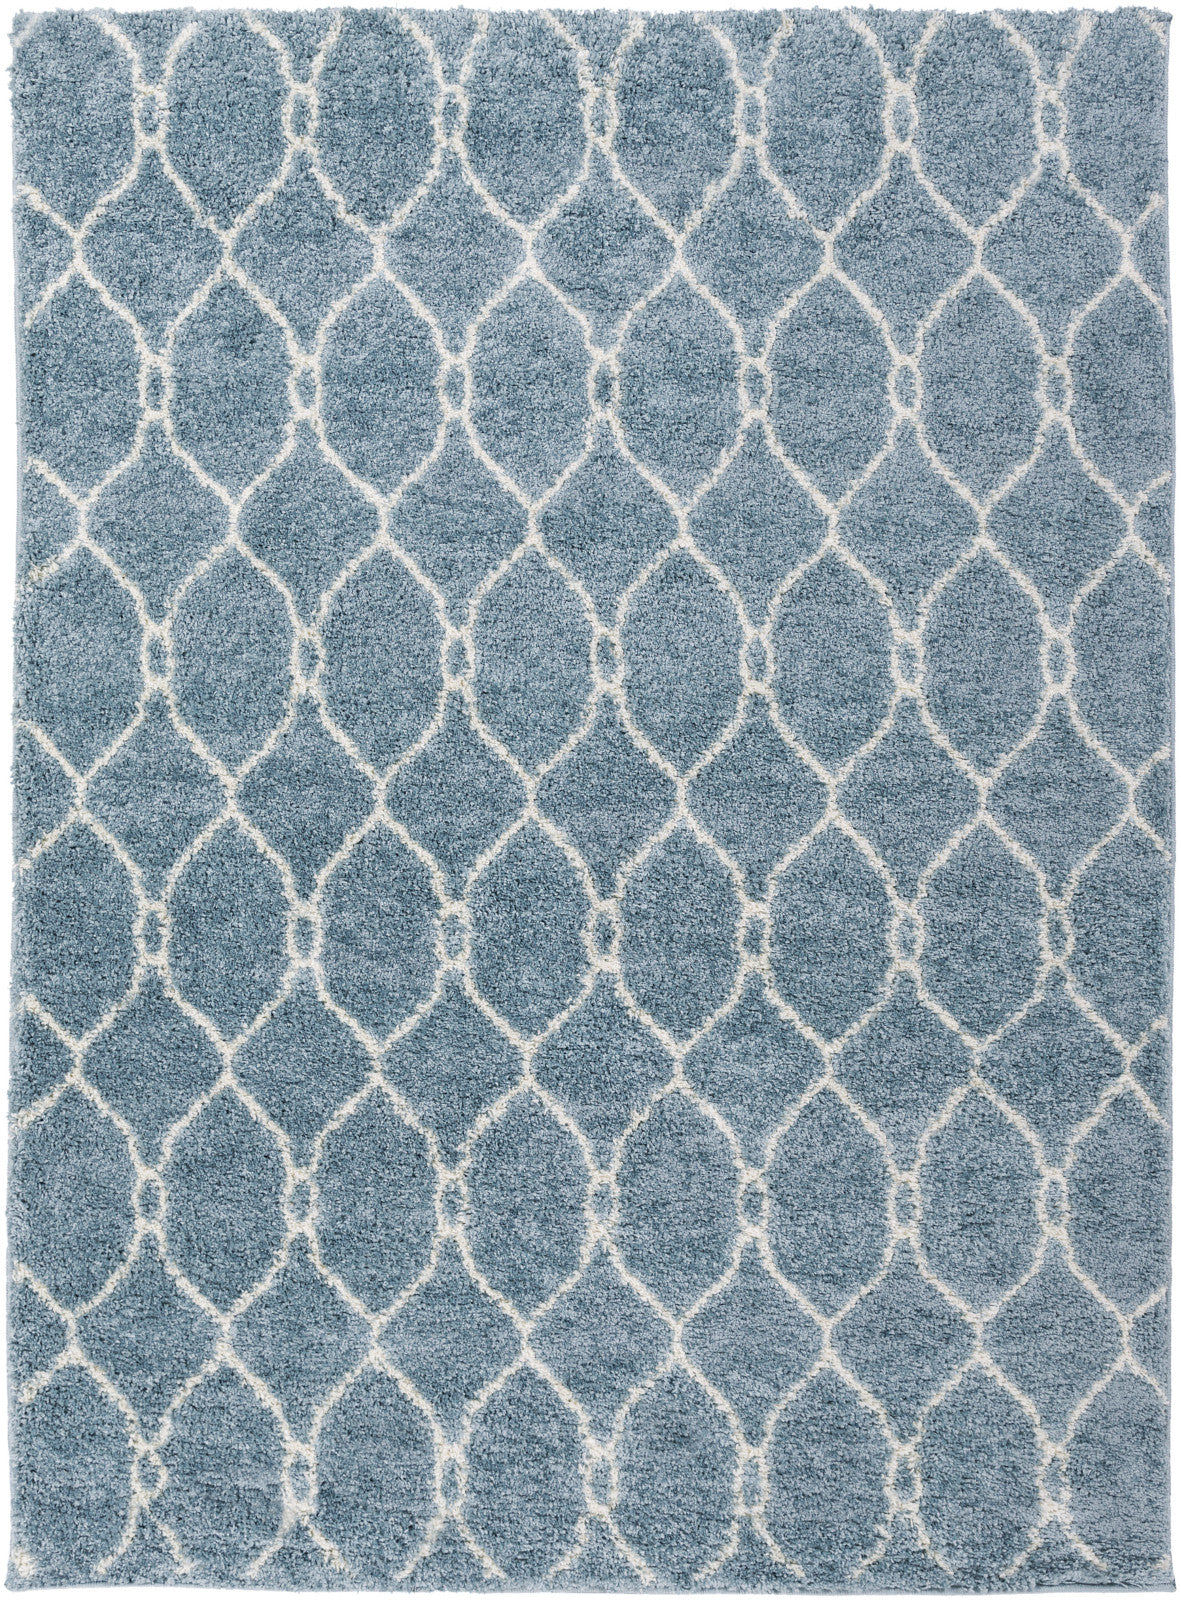 Surya Swift SWT-4025 Area Rug by Candice Olson